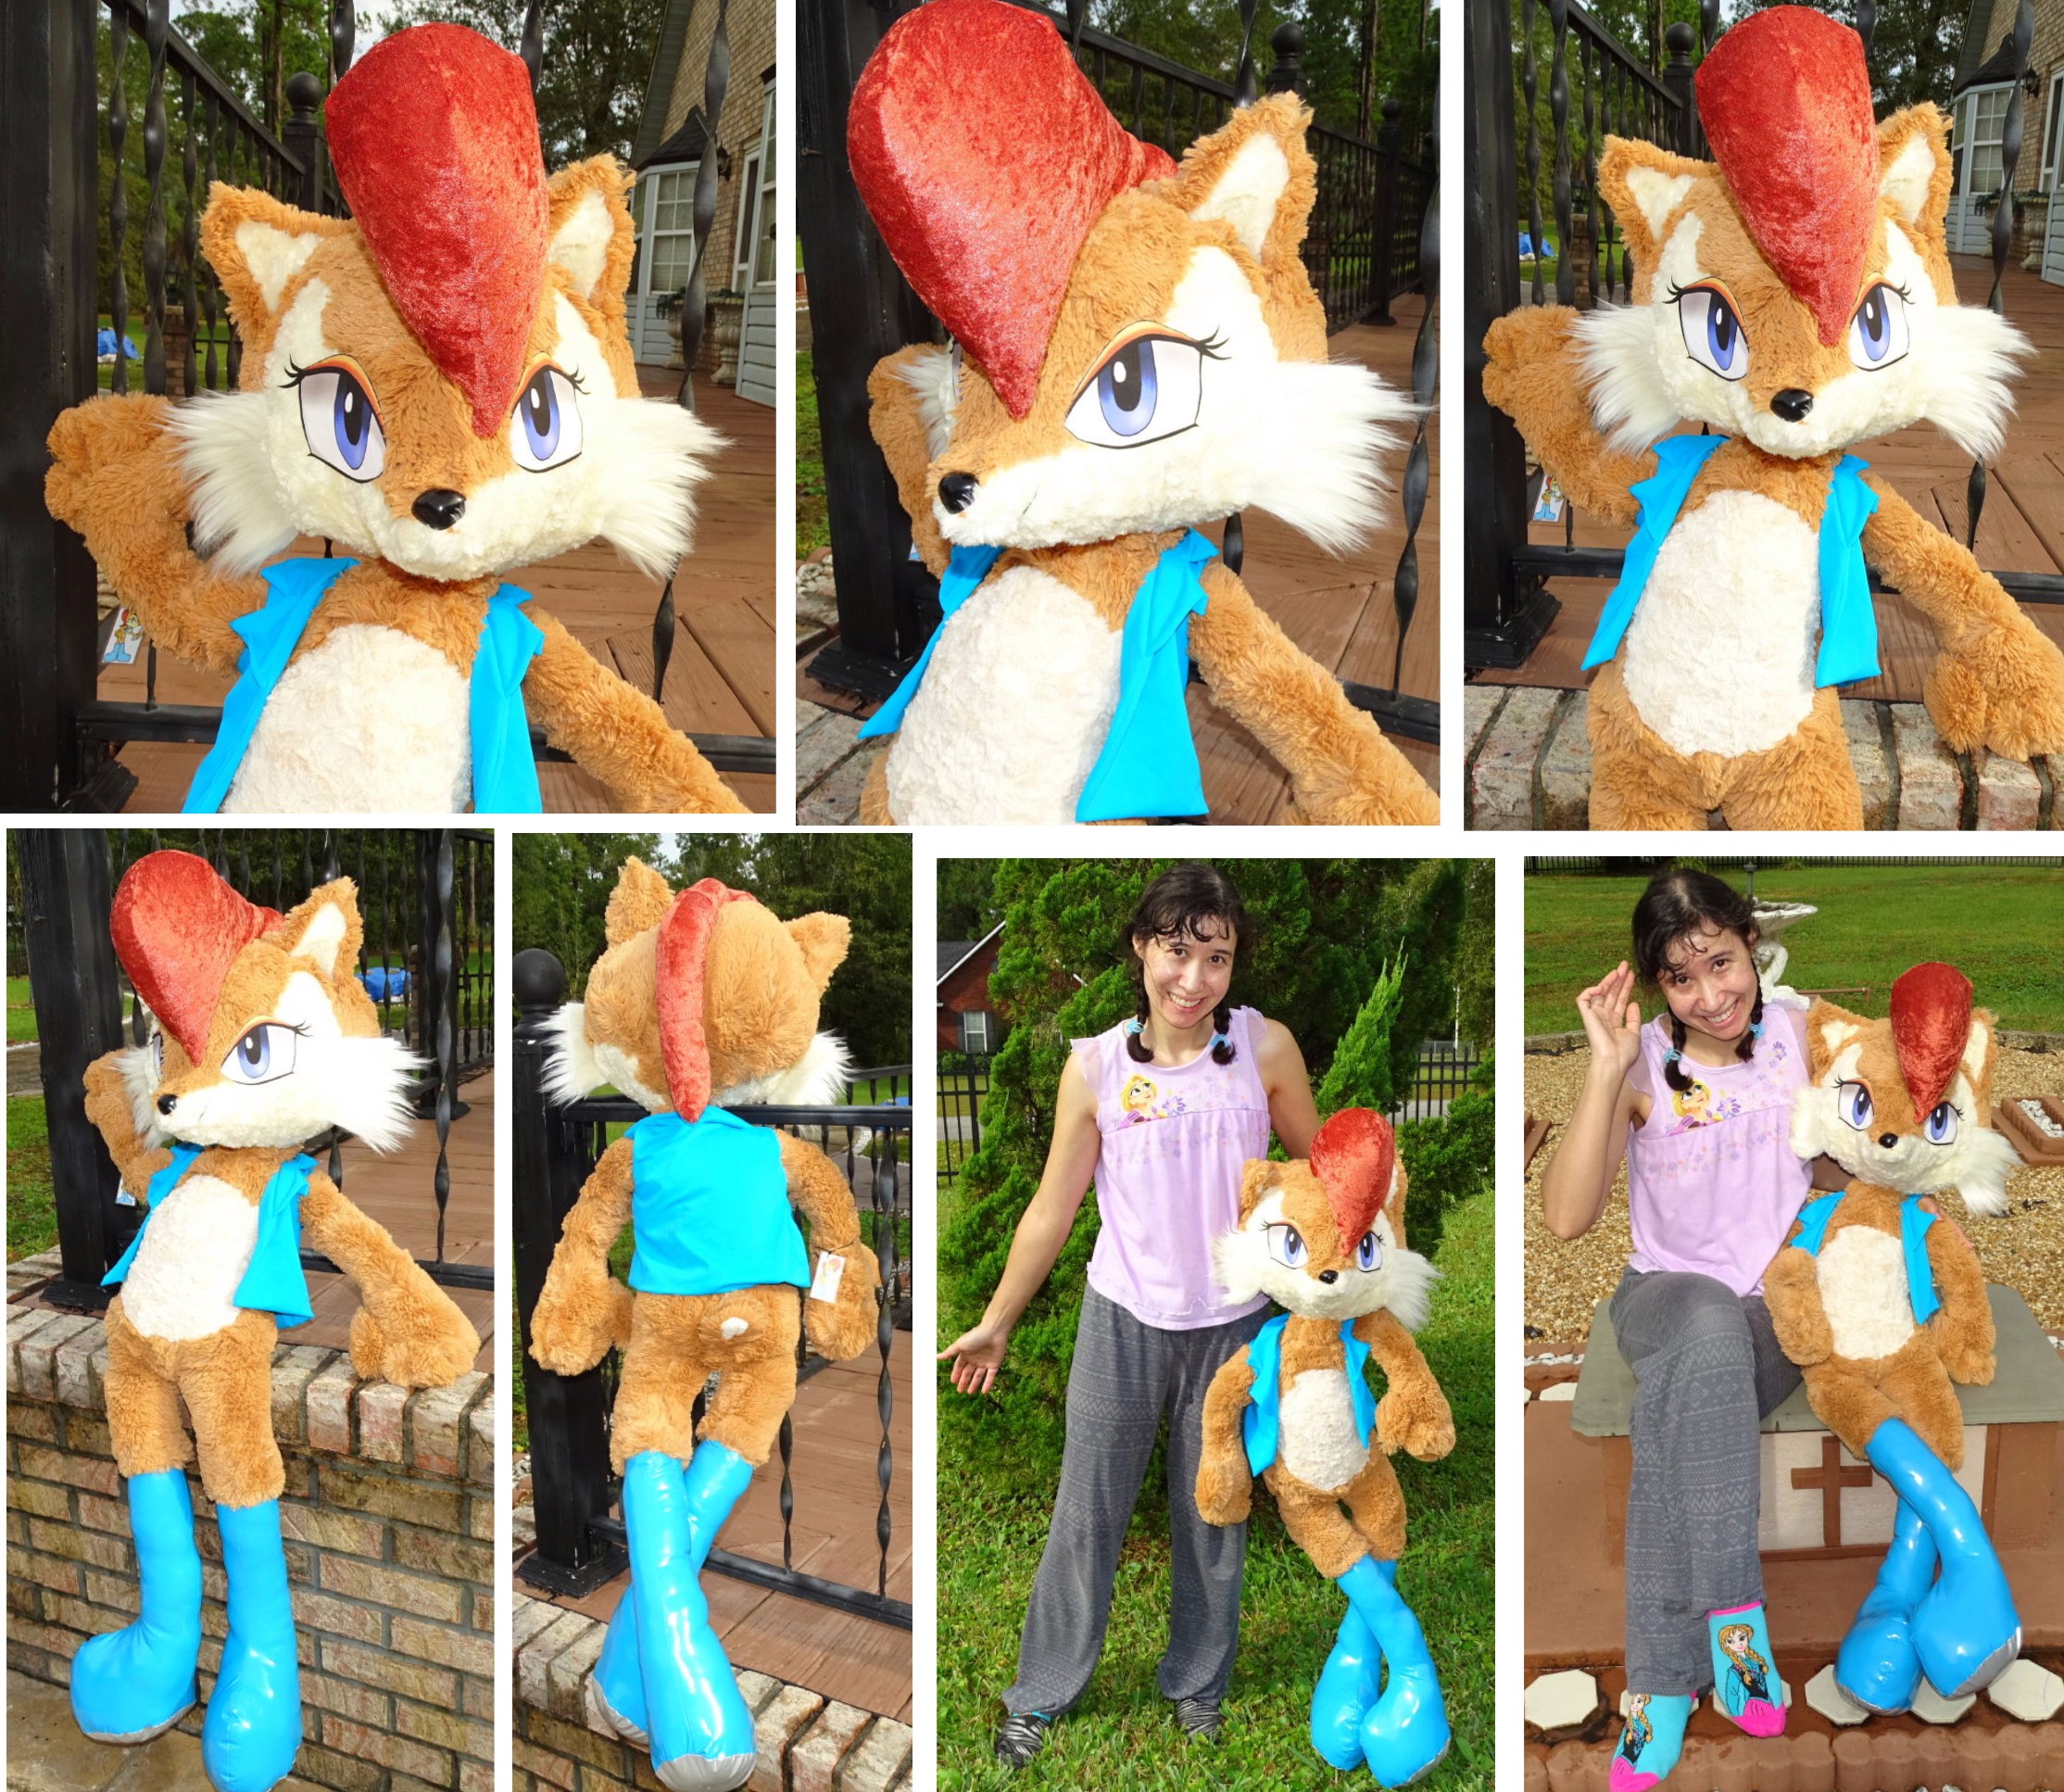 Sally Acorn 3' UFO Catcher doll from Sonic Hedgehog (Additional $50 fo...